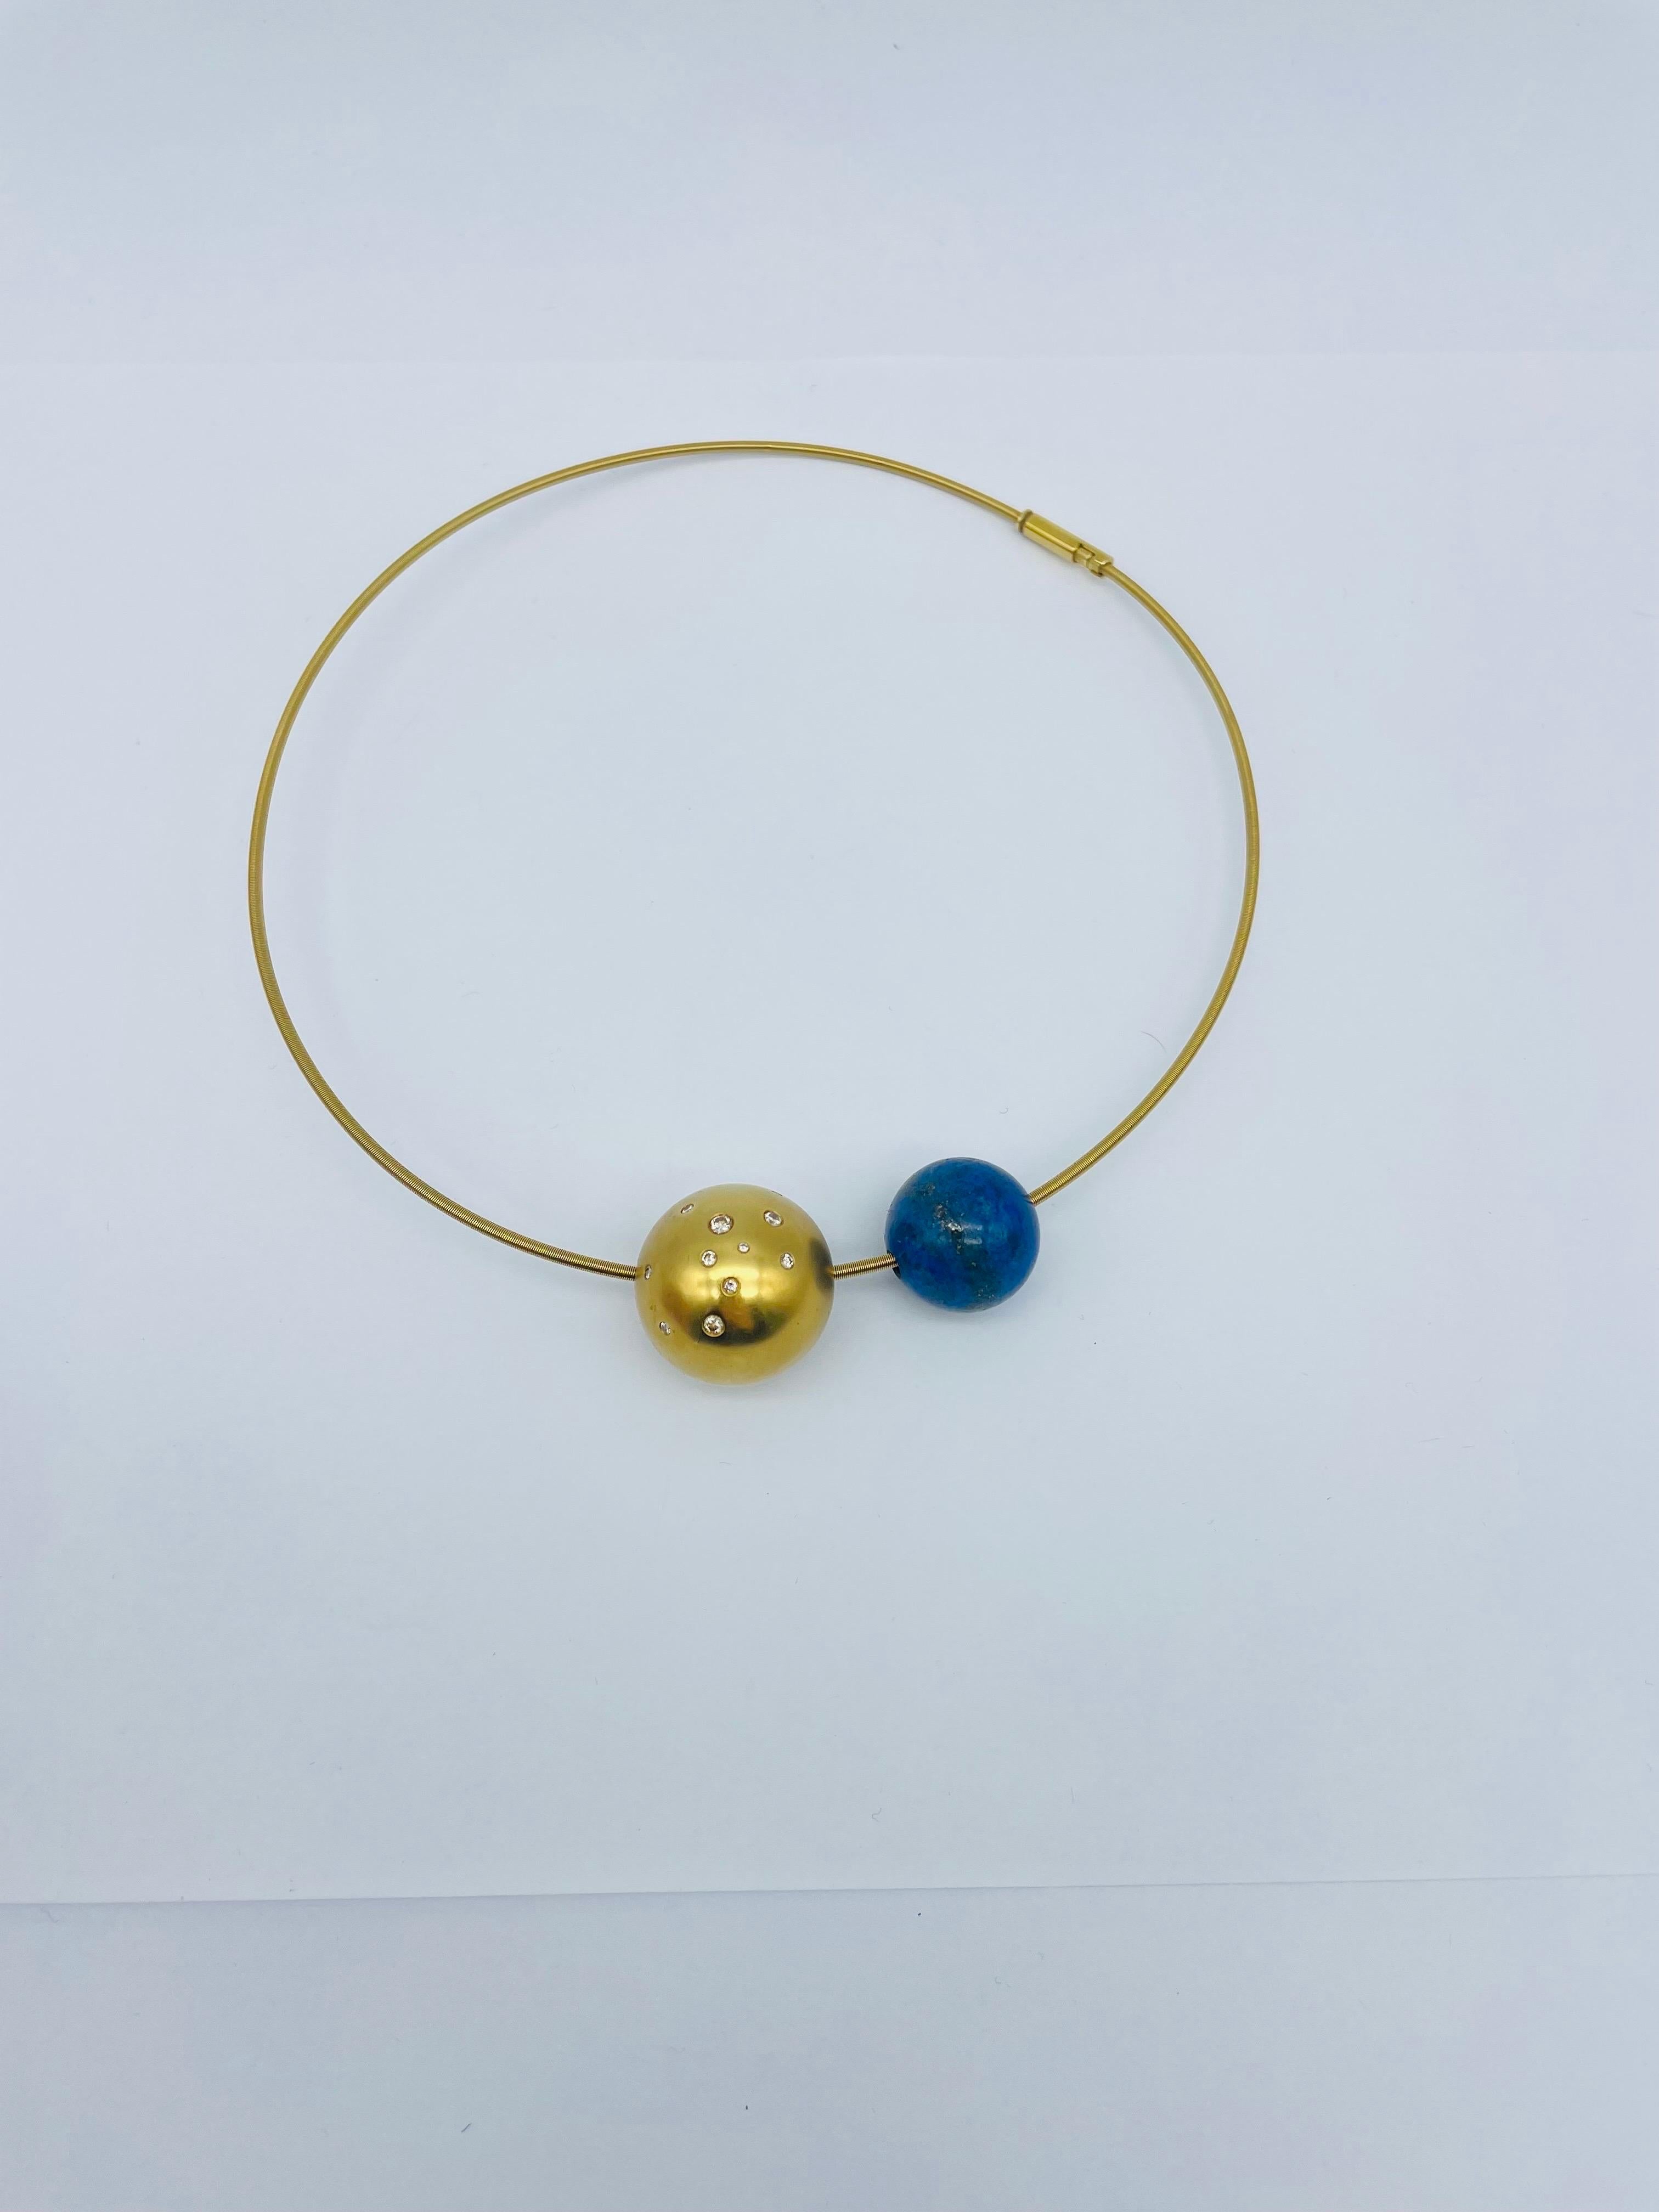 Extravagant Necklace from the renowned brand Niessing. This piece of jewelry is a true testament to the beauty and craftsmanship that can be achieved with precious metals and stones.

Crafted from 18k yellow gold, this necklace exudes a timeless